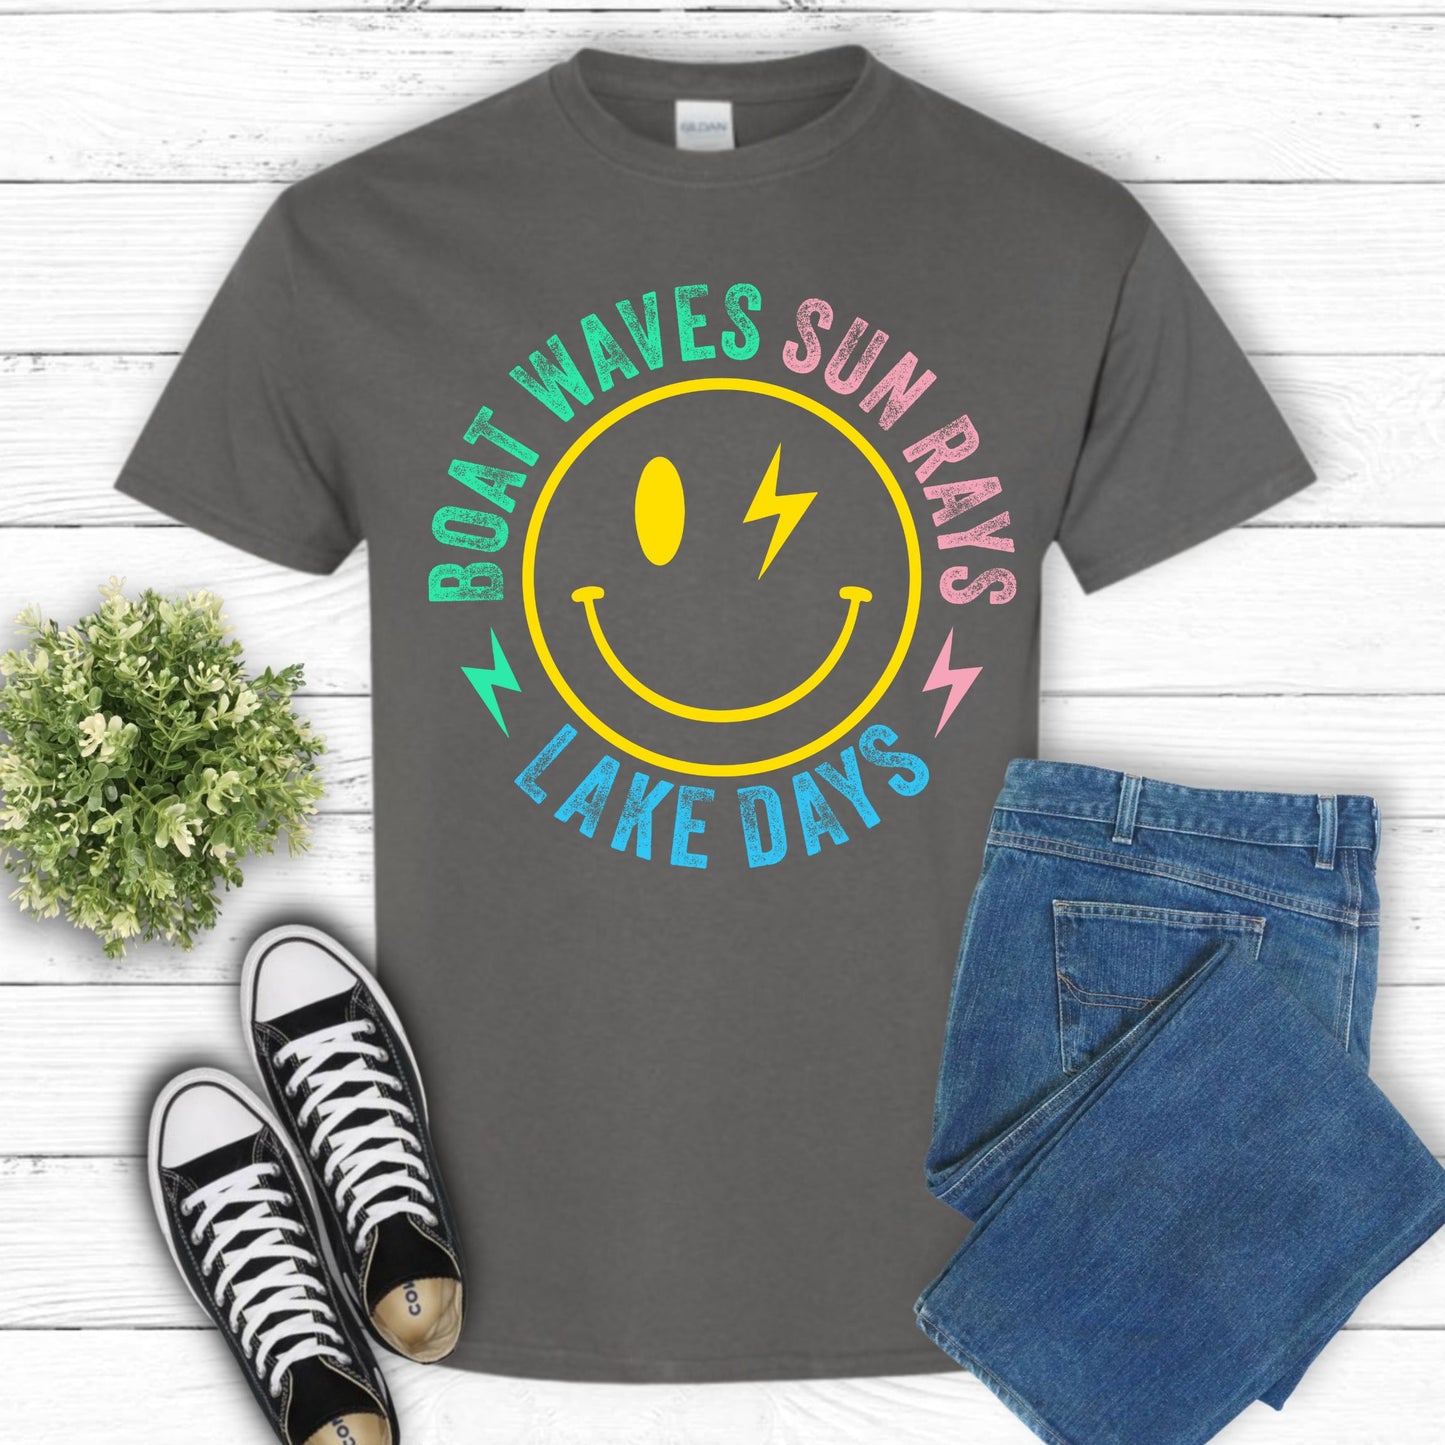 Lake Days Front and Back T-Shirt or Sweatshirt